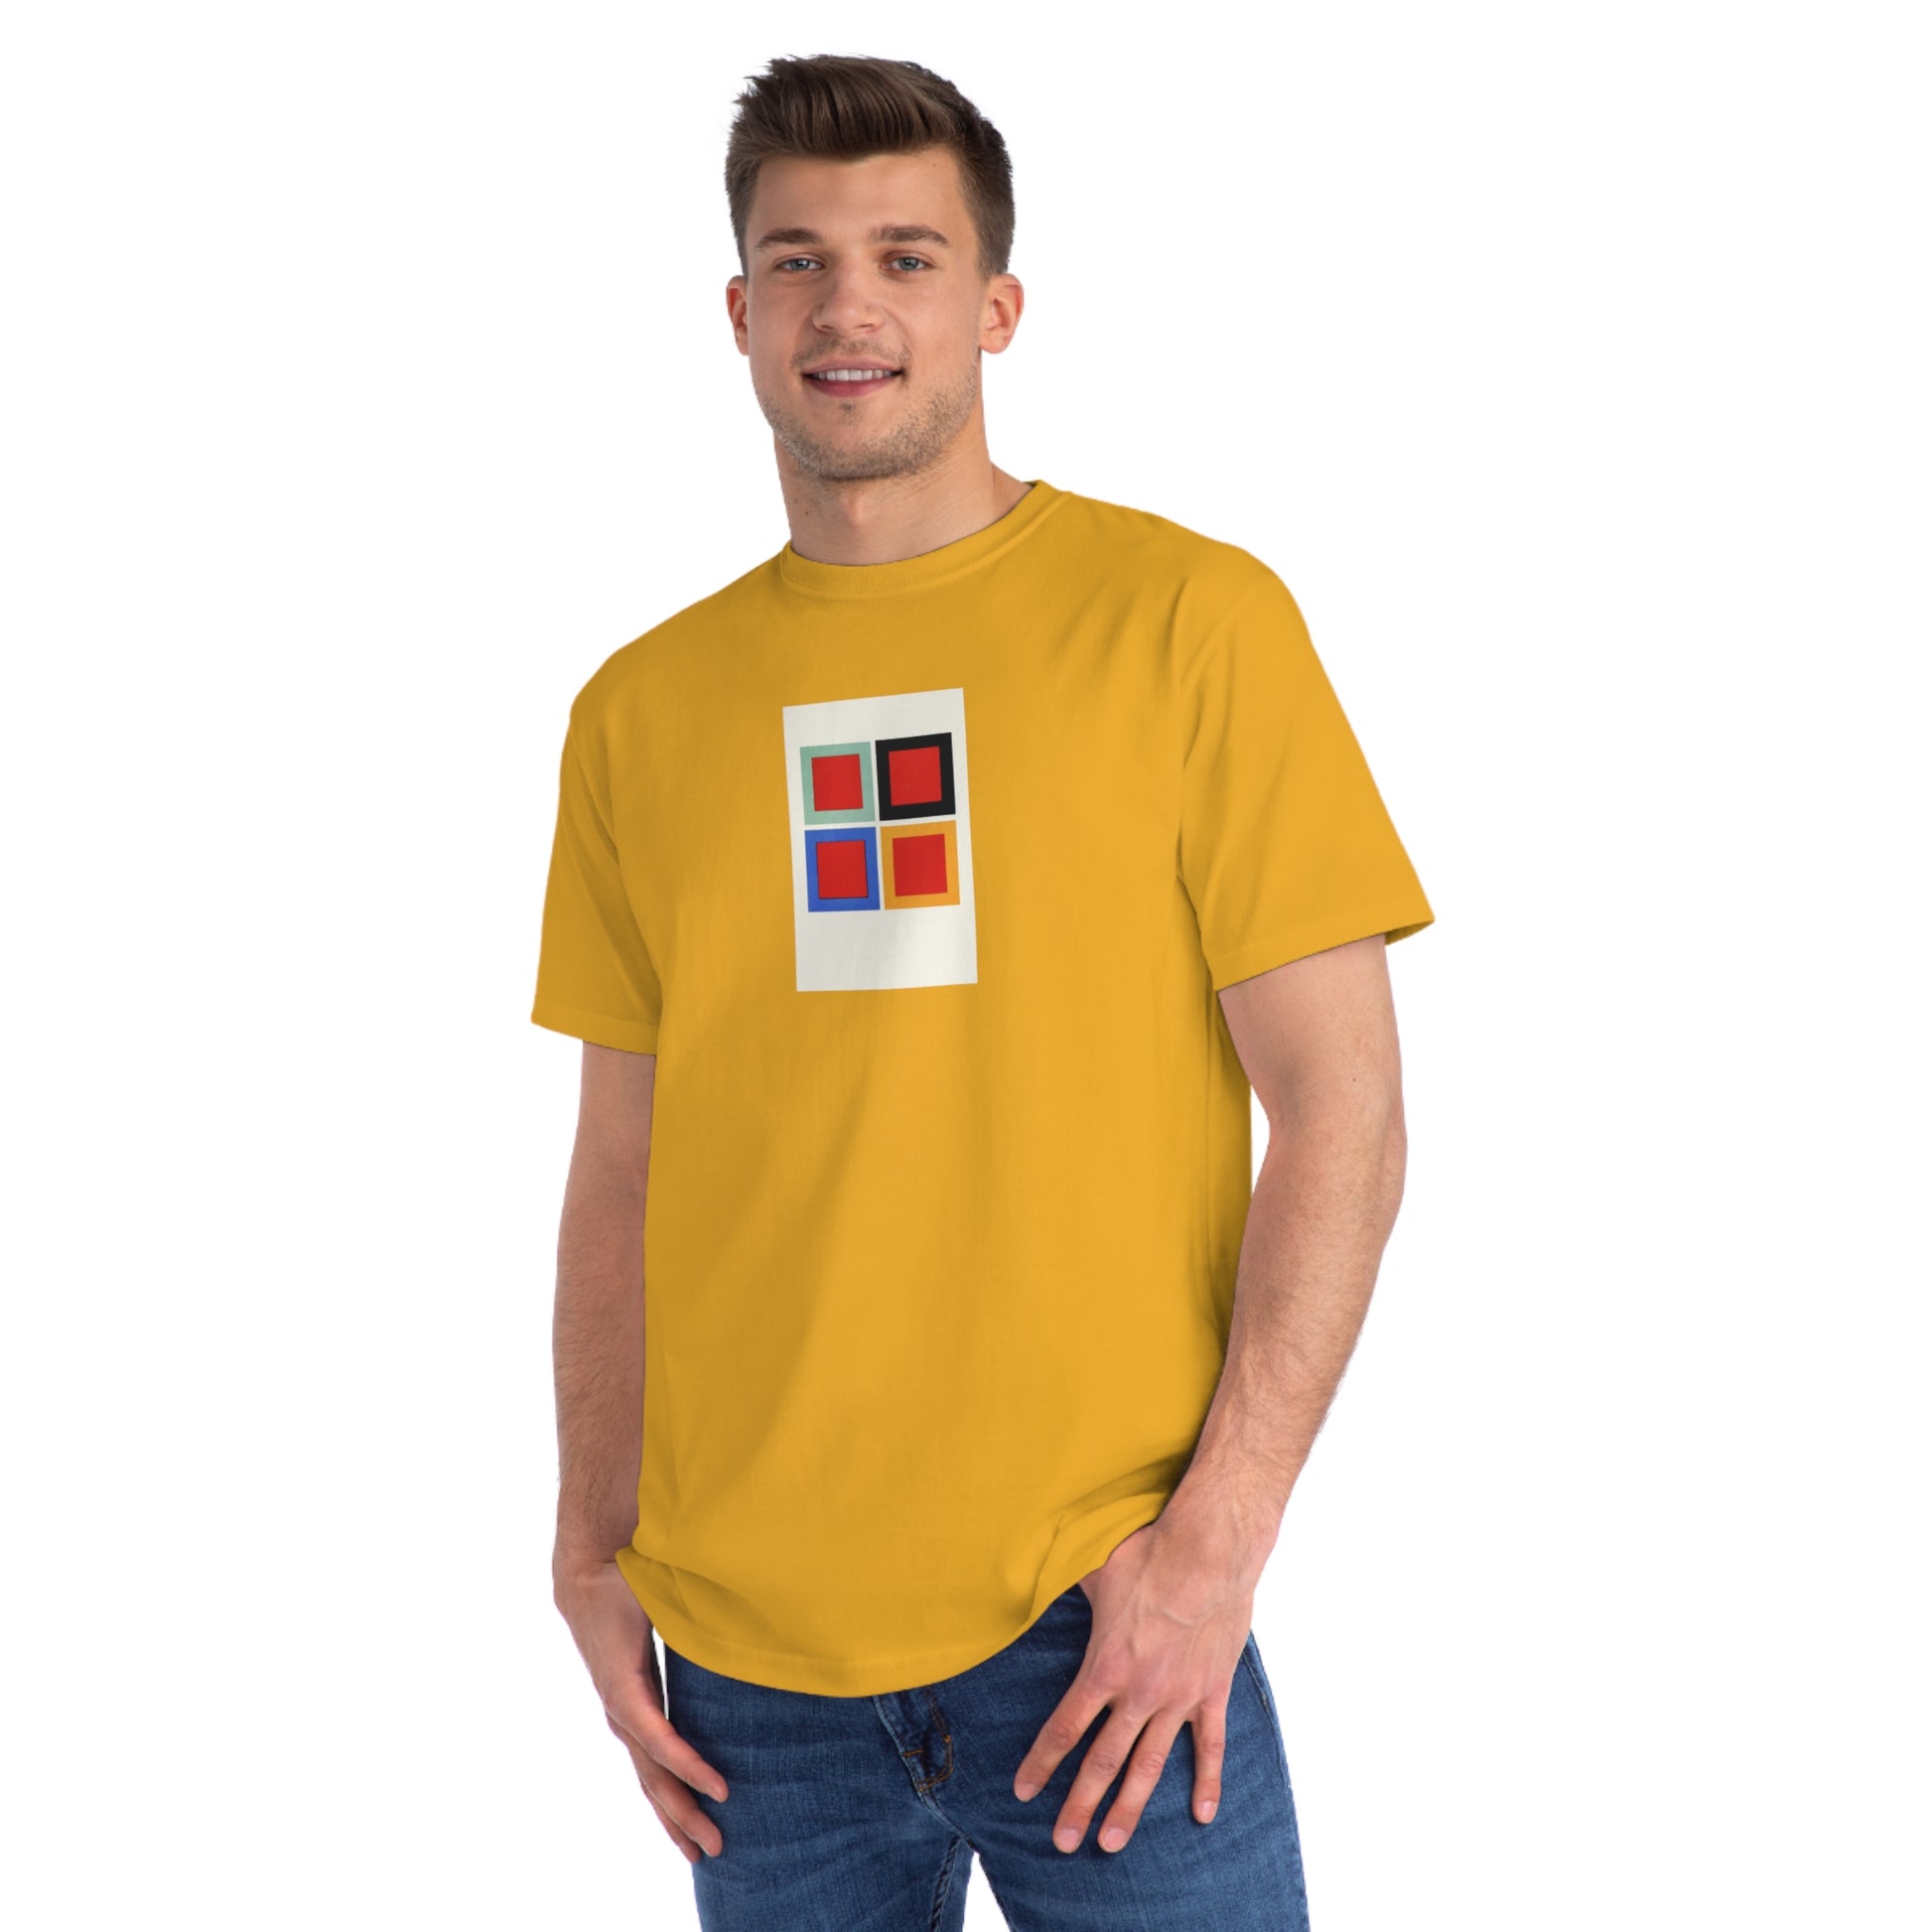 a man wearing a yellow t - shirt with a red, blue, and yellow